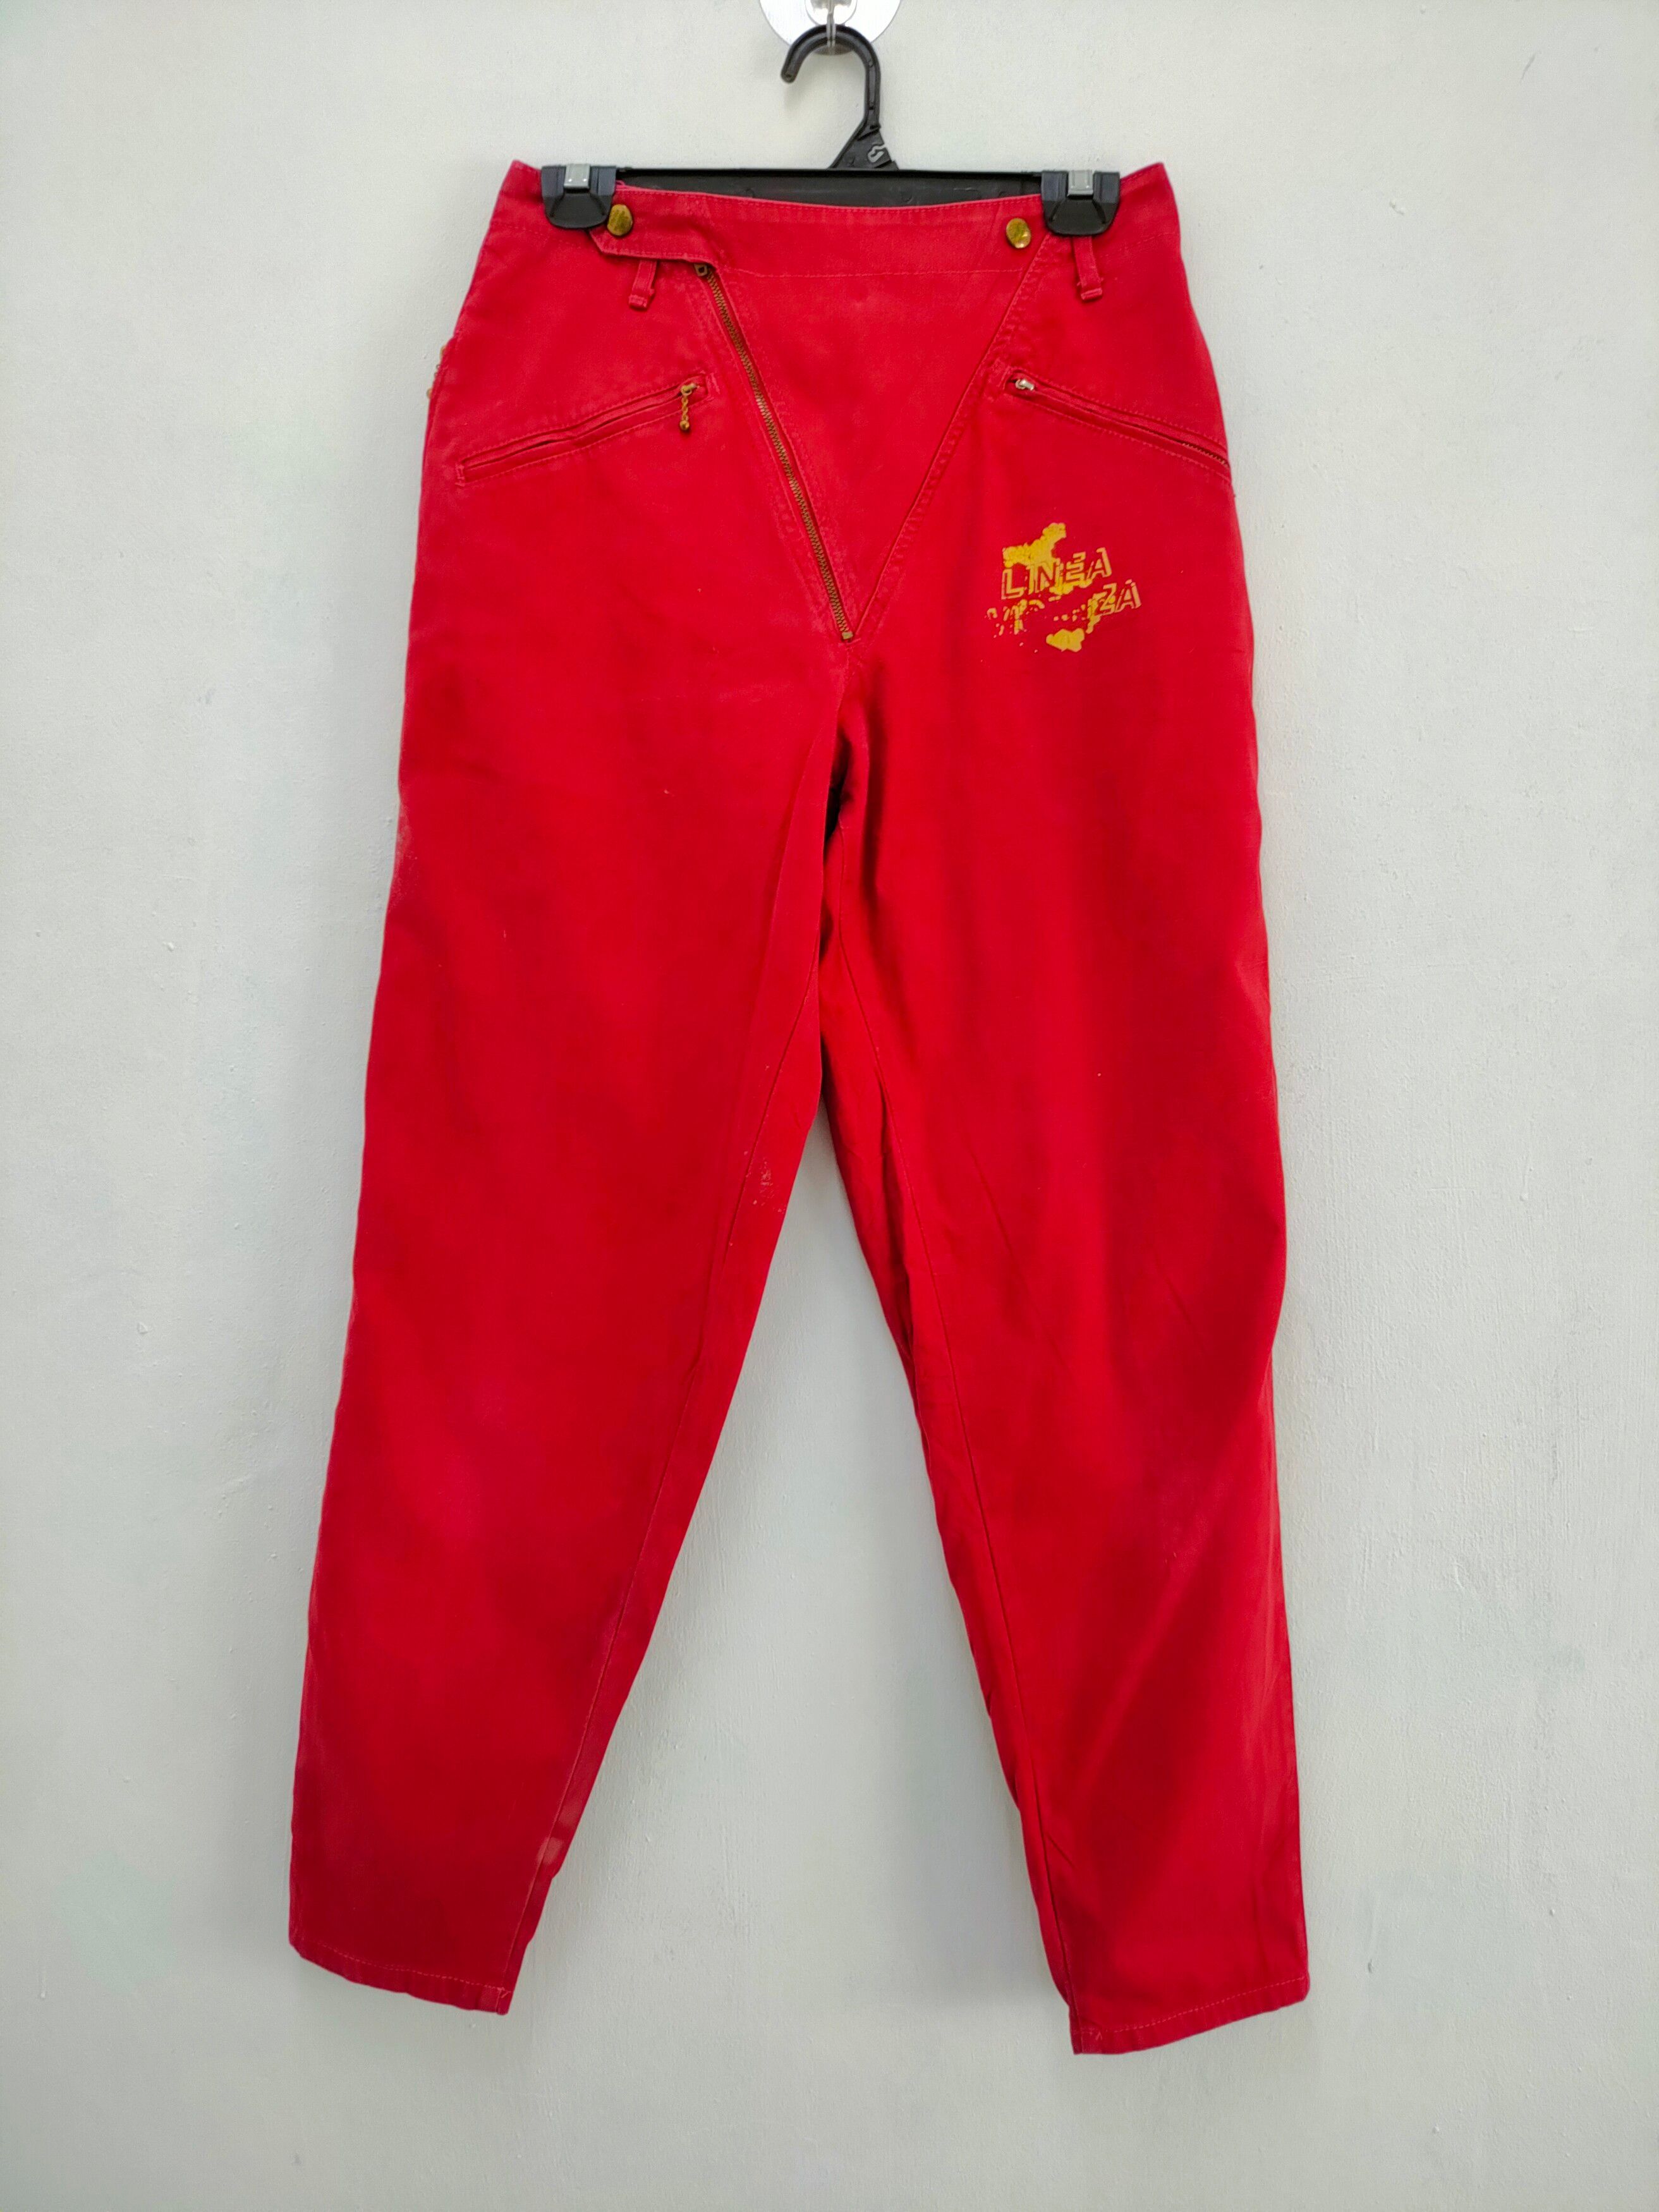 Linea Linea Vicenza Red Pants Made In Japan Size US 26 / EU 42 - 1 Preview